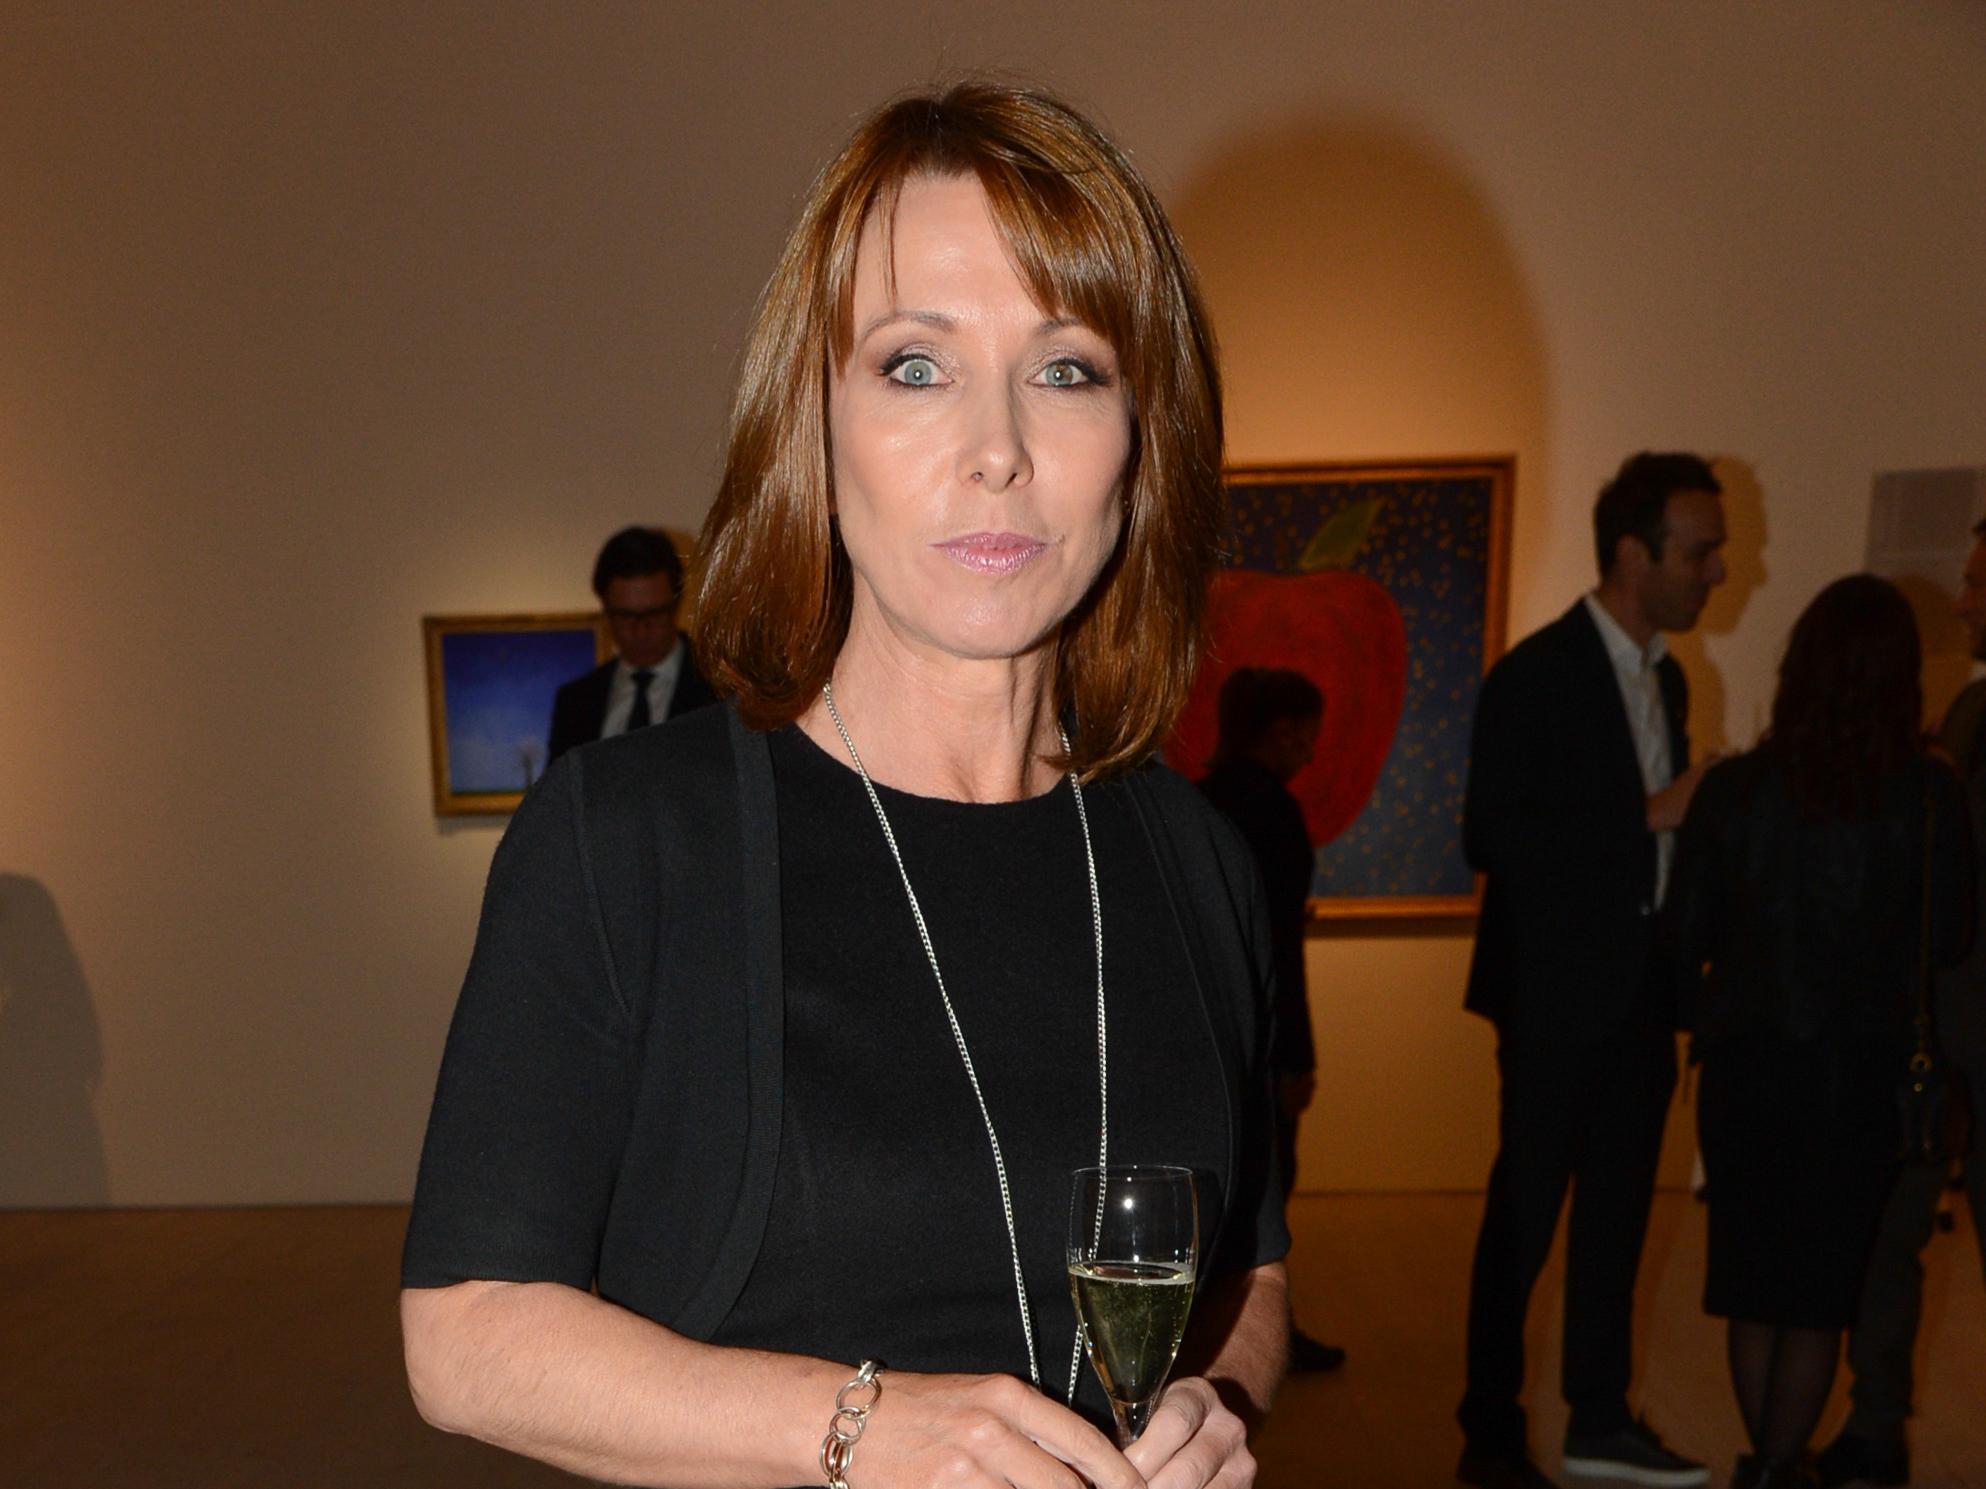 Kay Burley has been accused of being confrontational